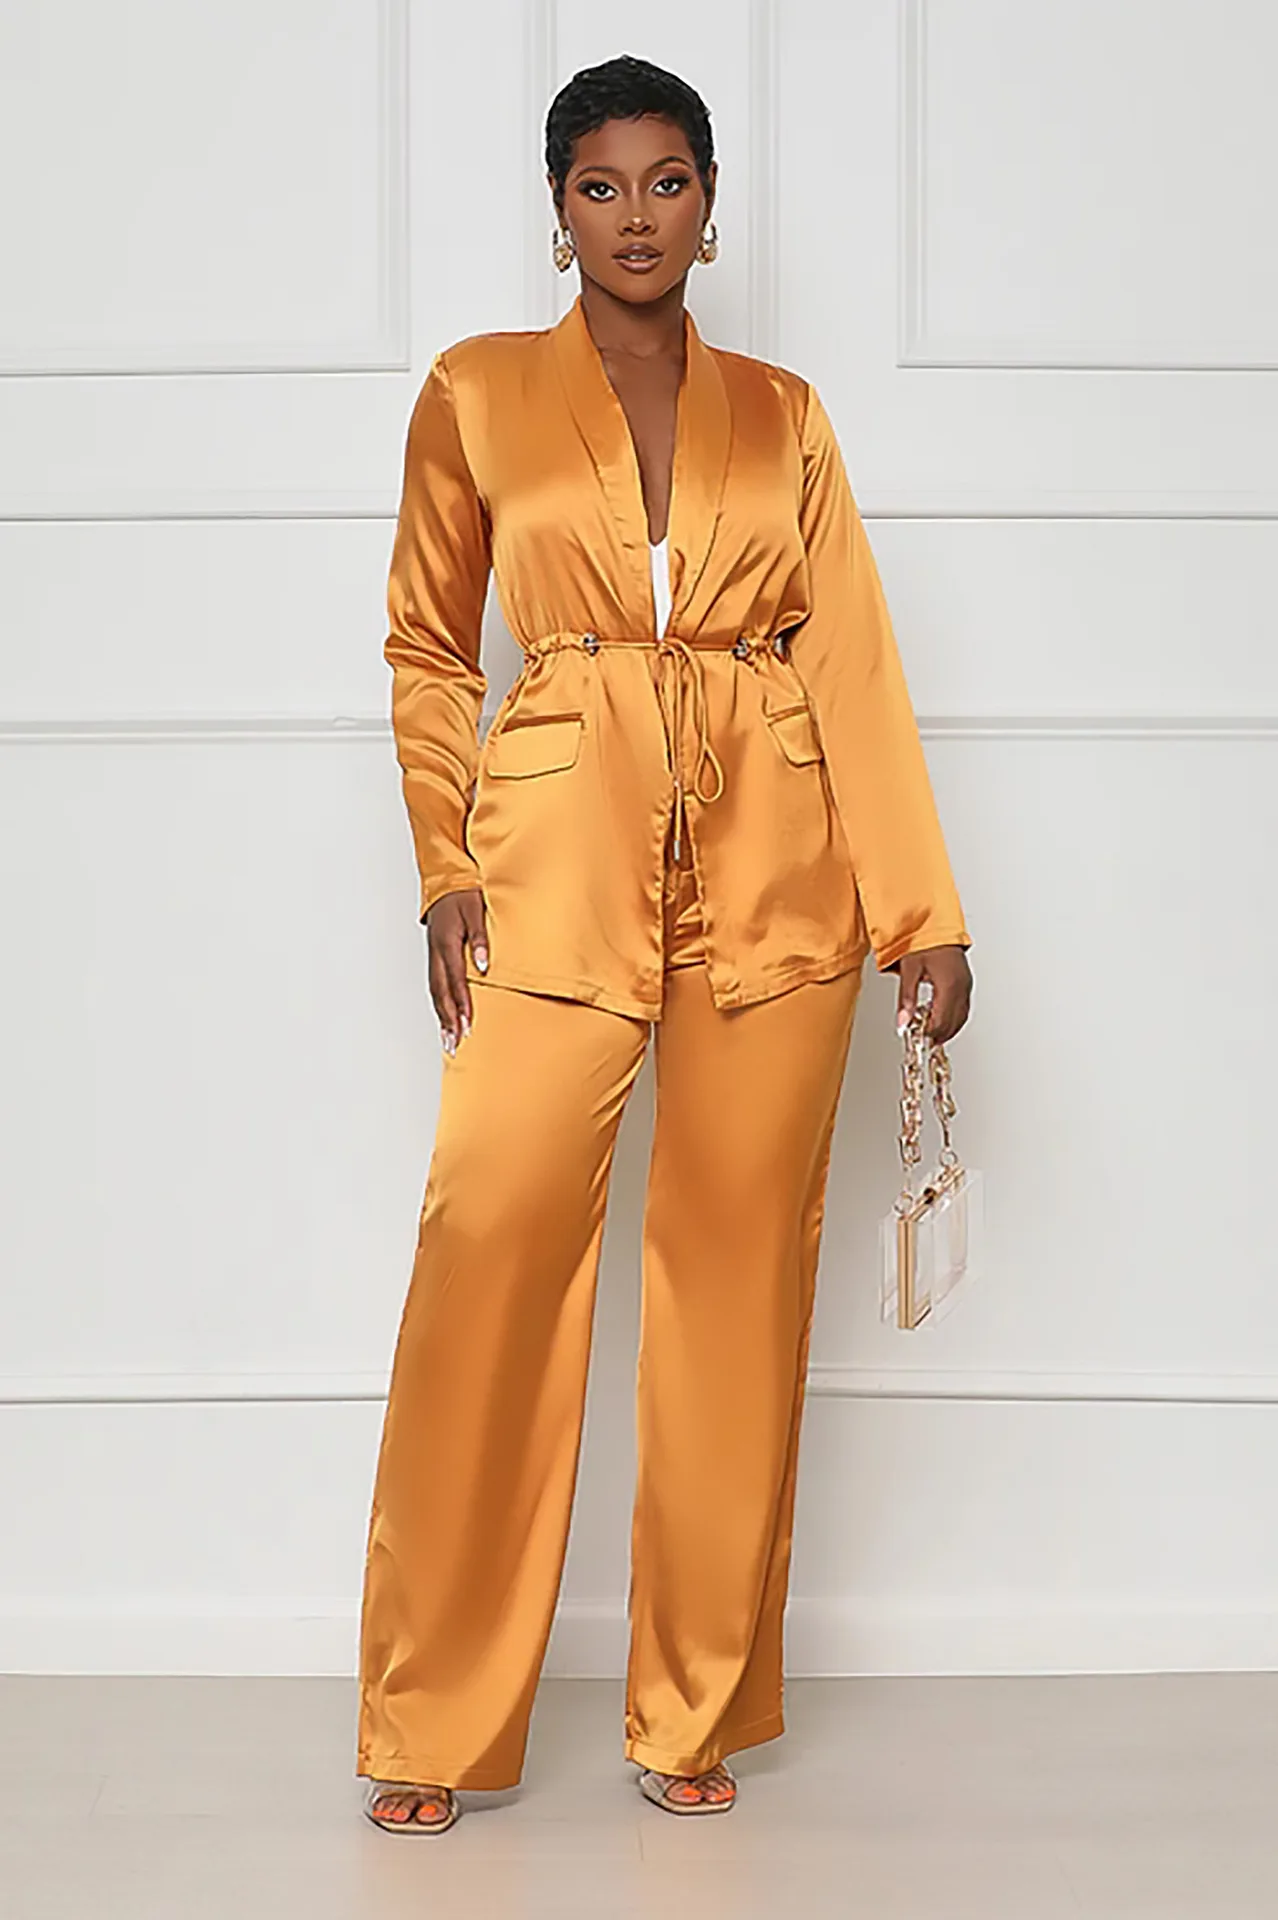 Two-Piece Silk Suit for African Women, V-Neck Lace Up Shirt, Wide Leg Pants, Casual Fashion, Autumn